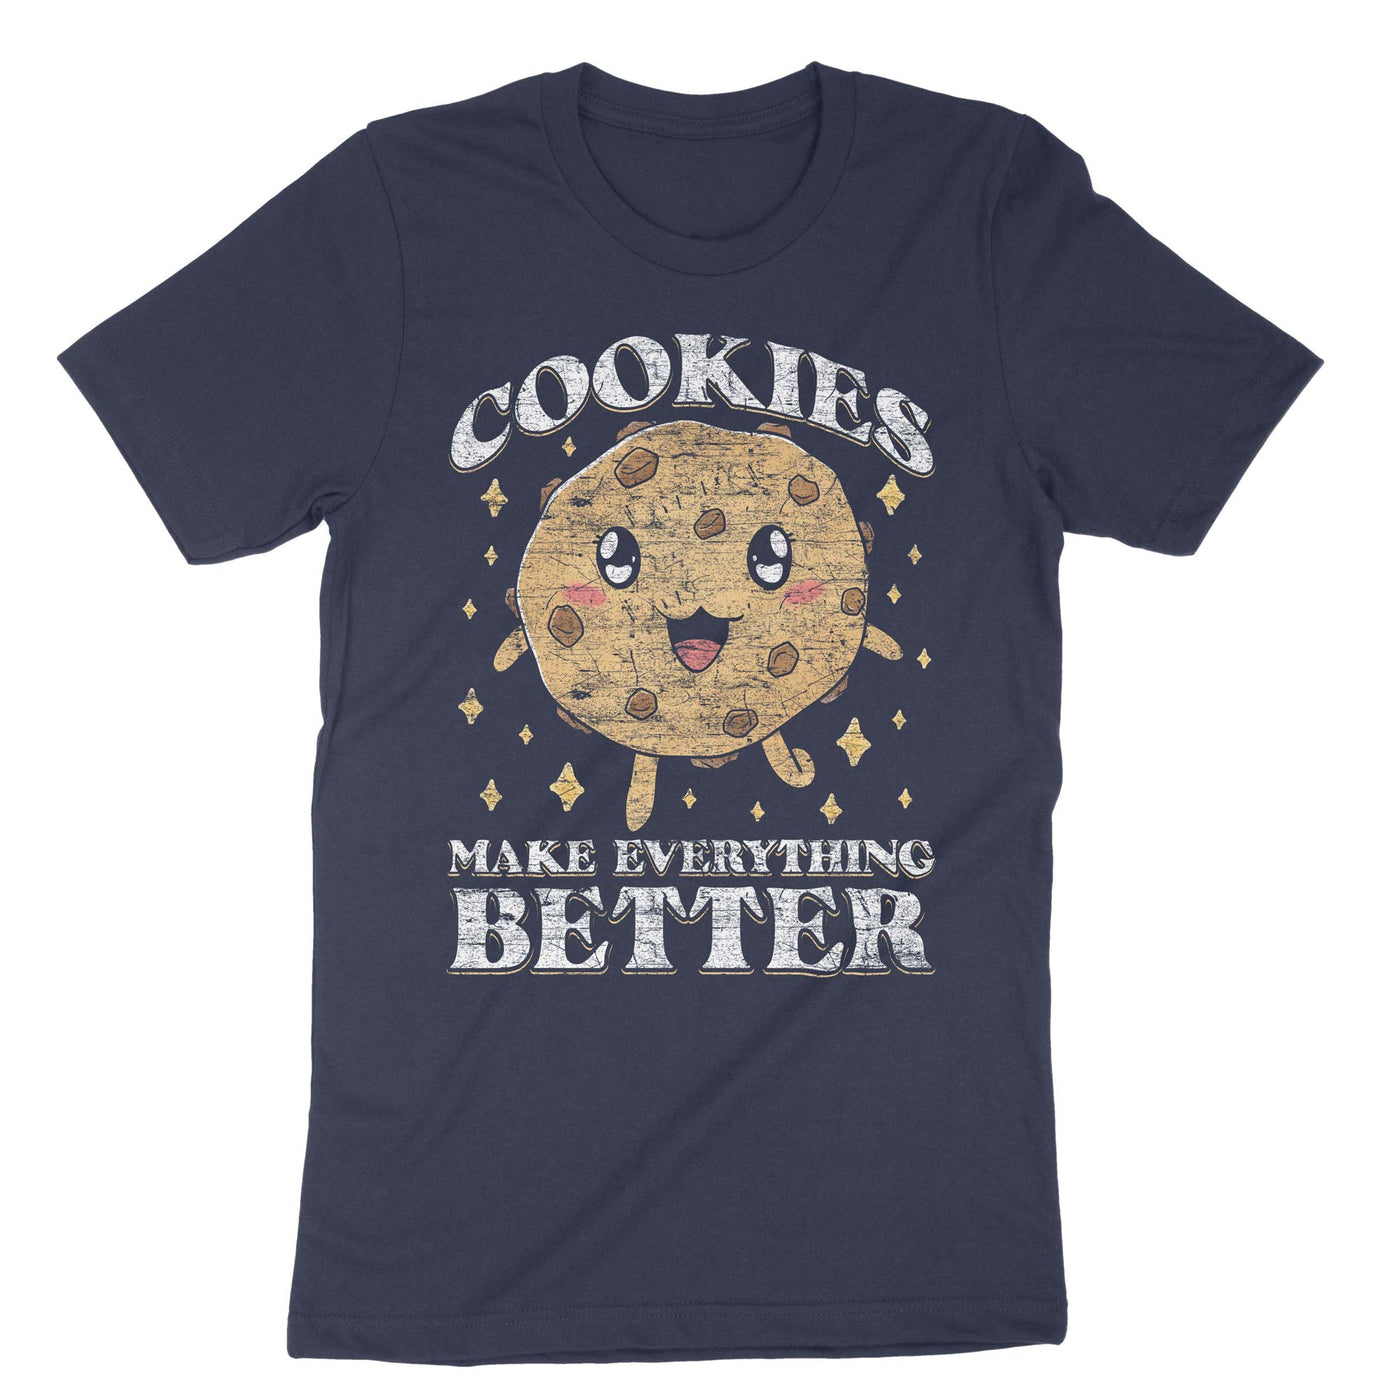 Navy Cookies Make Everything Better T-Shirt#color_navy